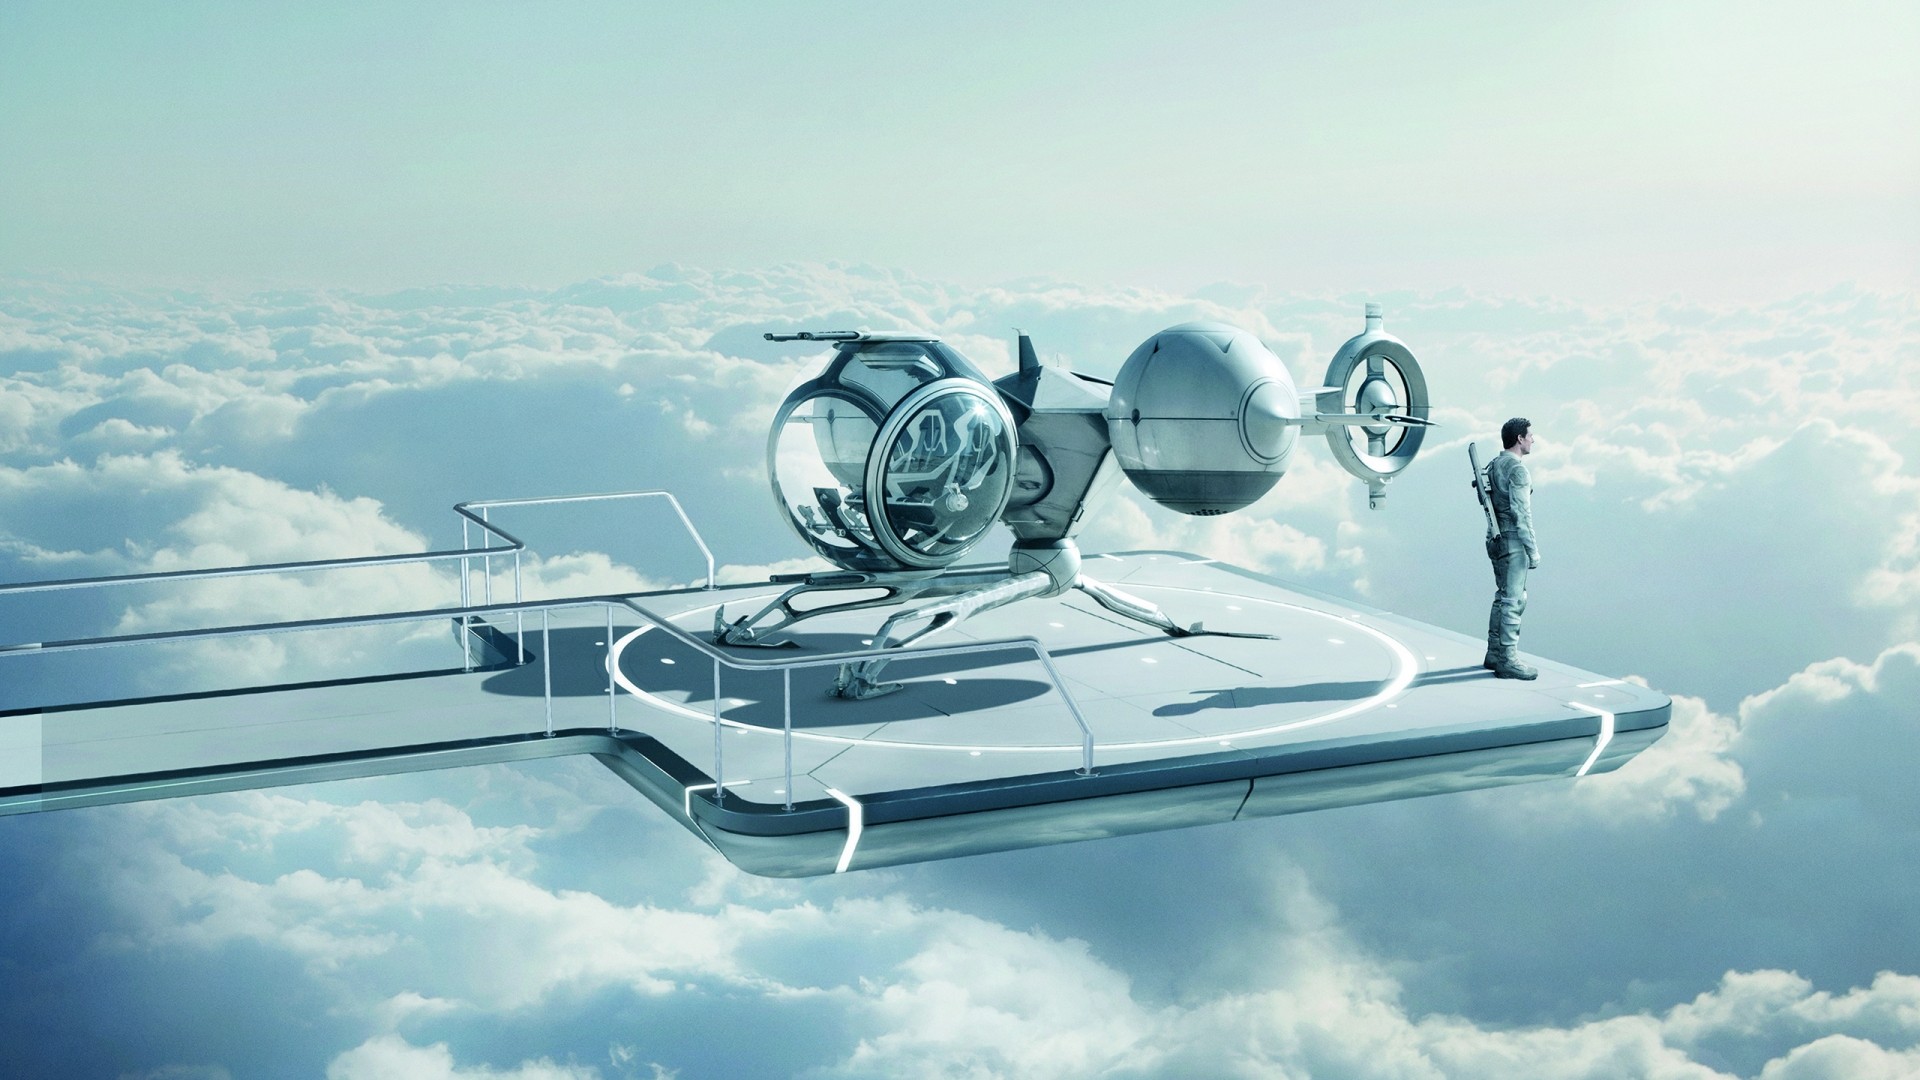 Movies Men Actor Tom Cruise Oblivion Movie Spaceship Clouds Futuristic Alone Helicopters Shadow Sky 1920x1080